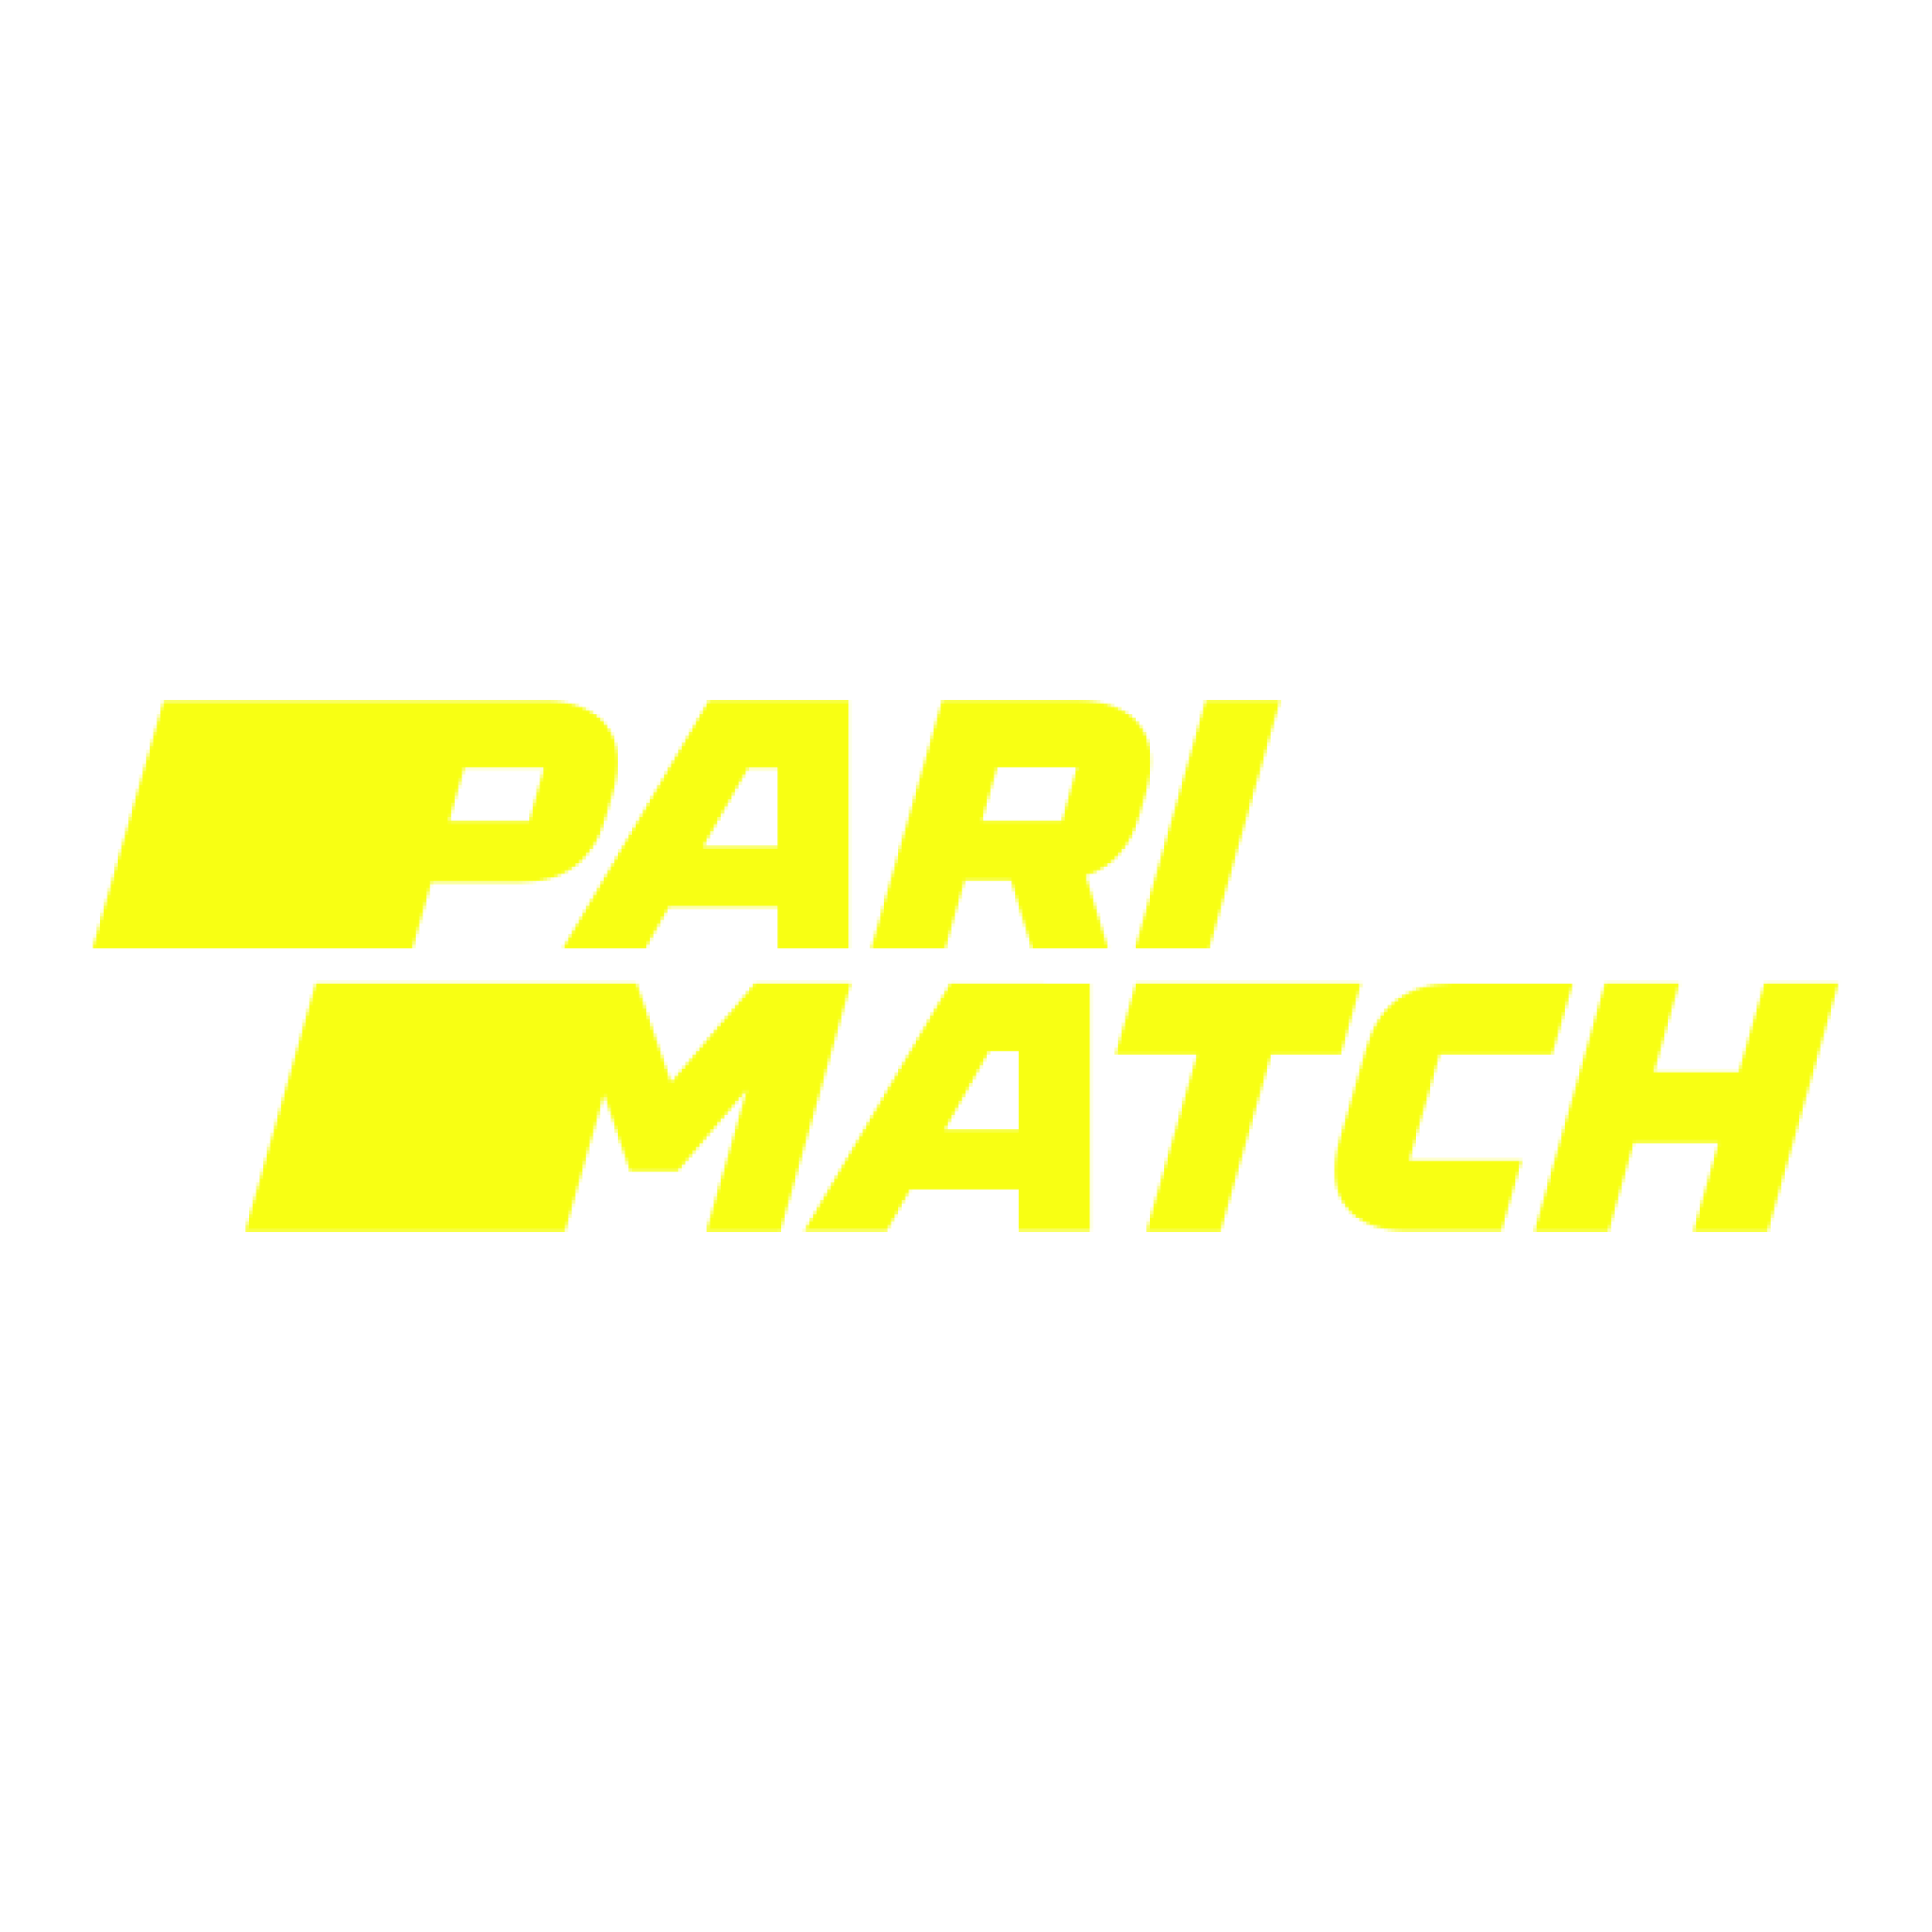 Start betting on cricket online with Parimatch!